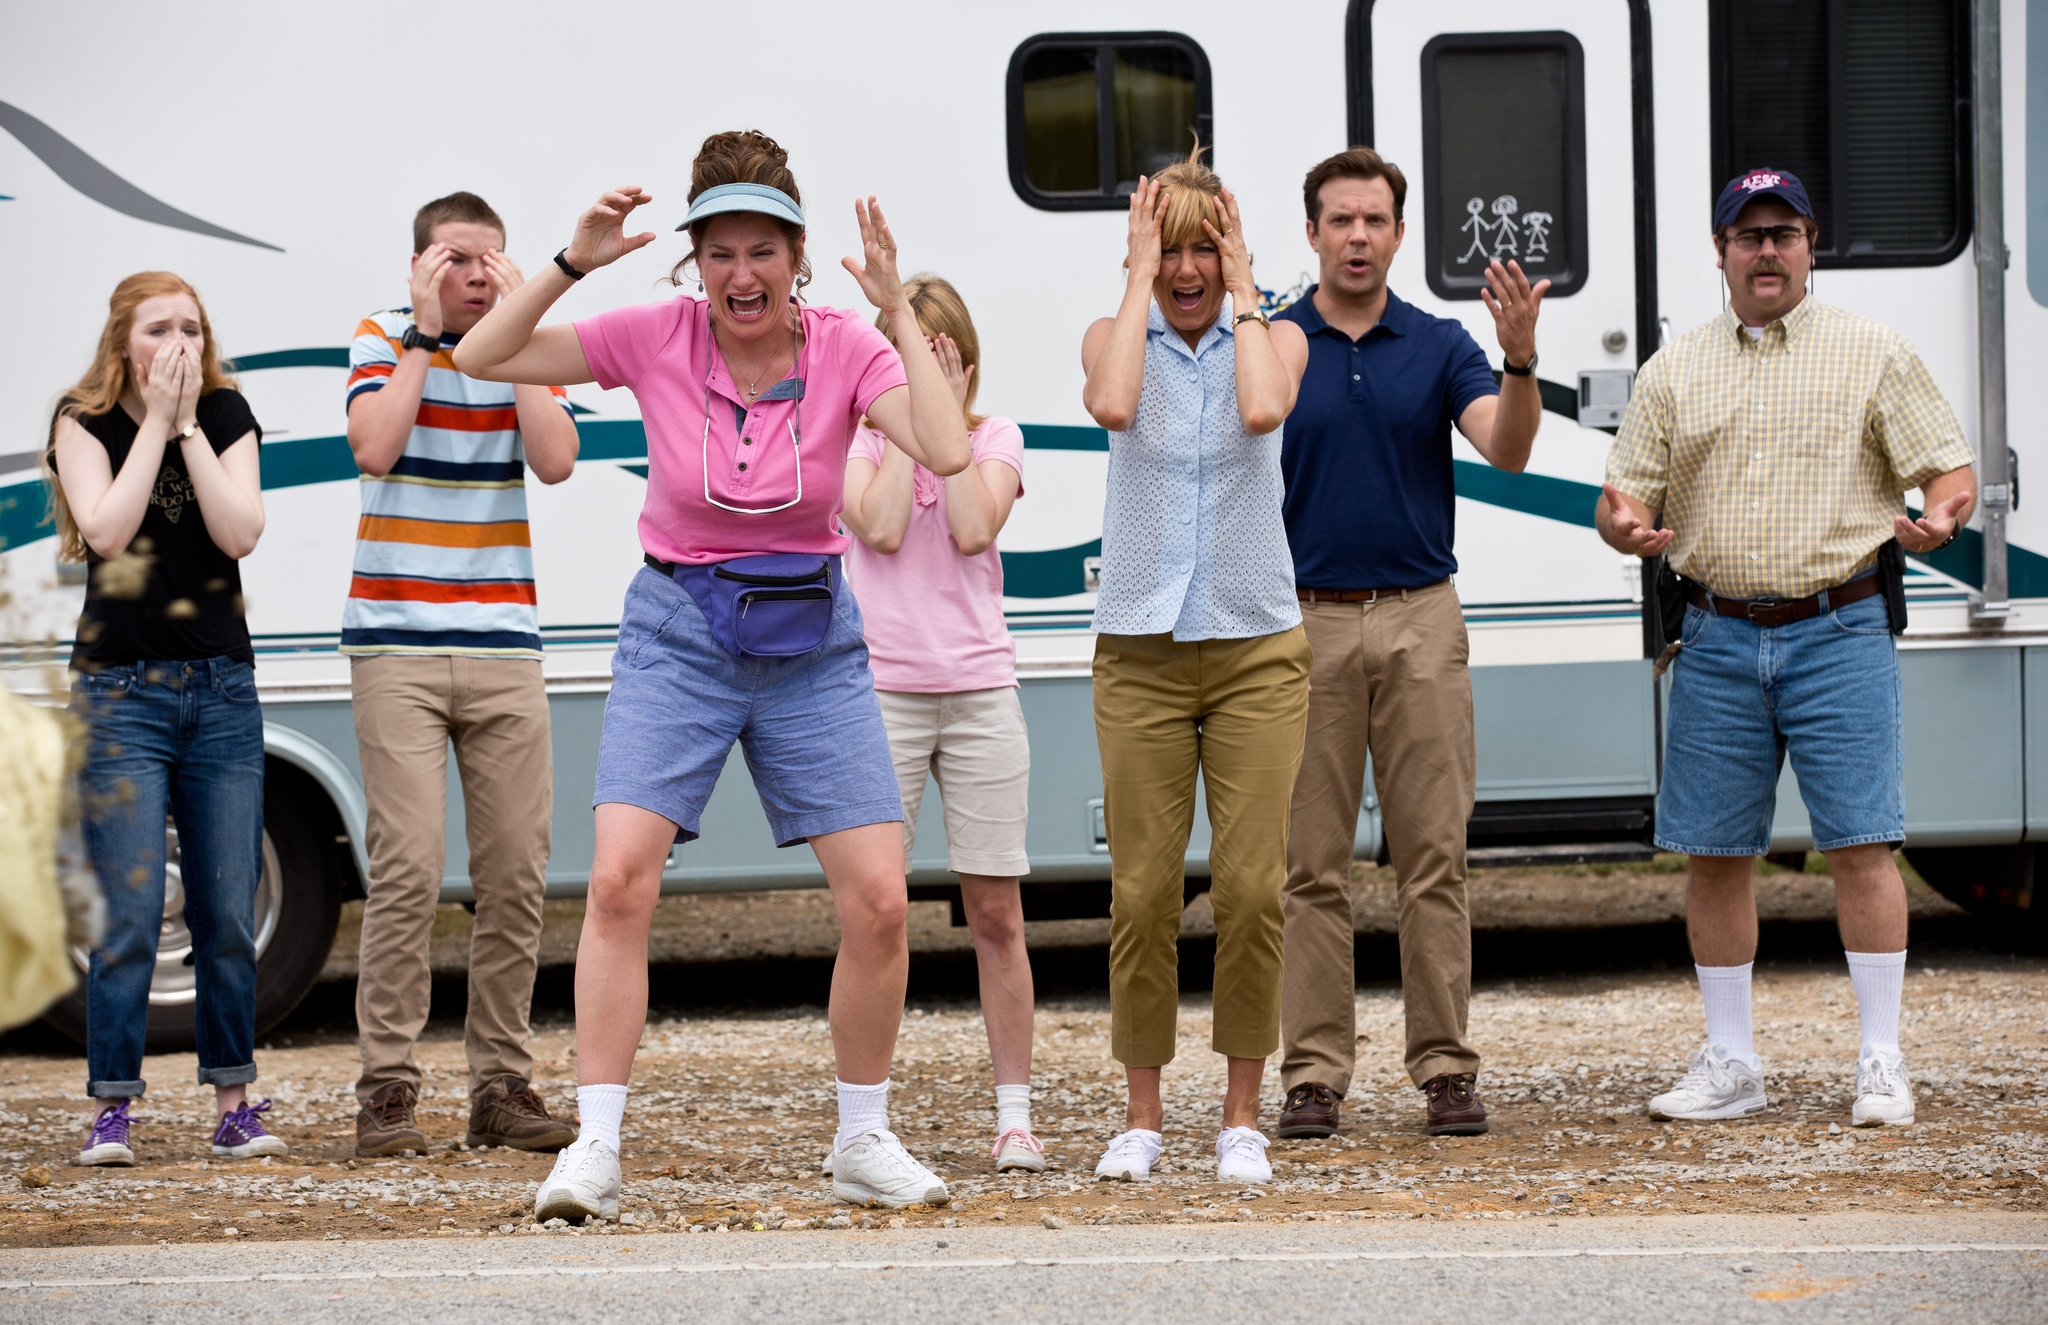 Exploring Films on Netflix: Family Trip and We’re the Millers